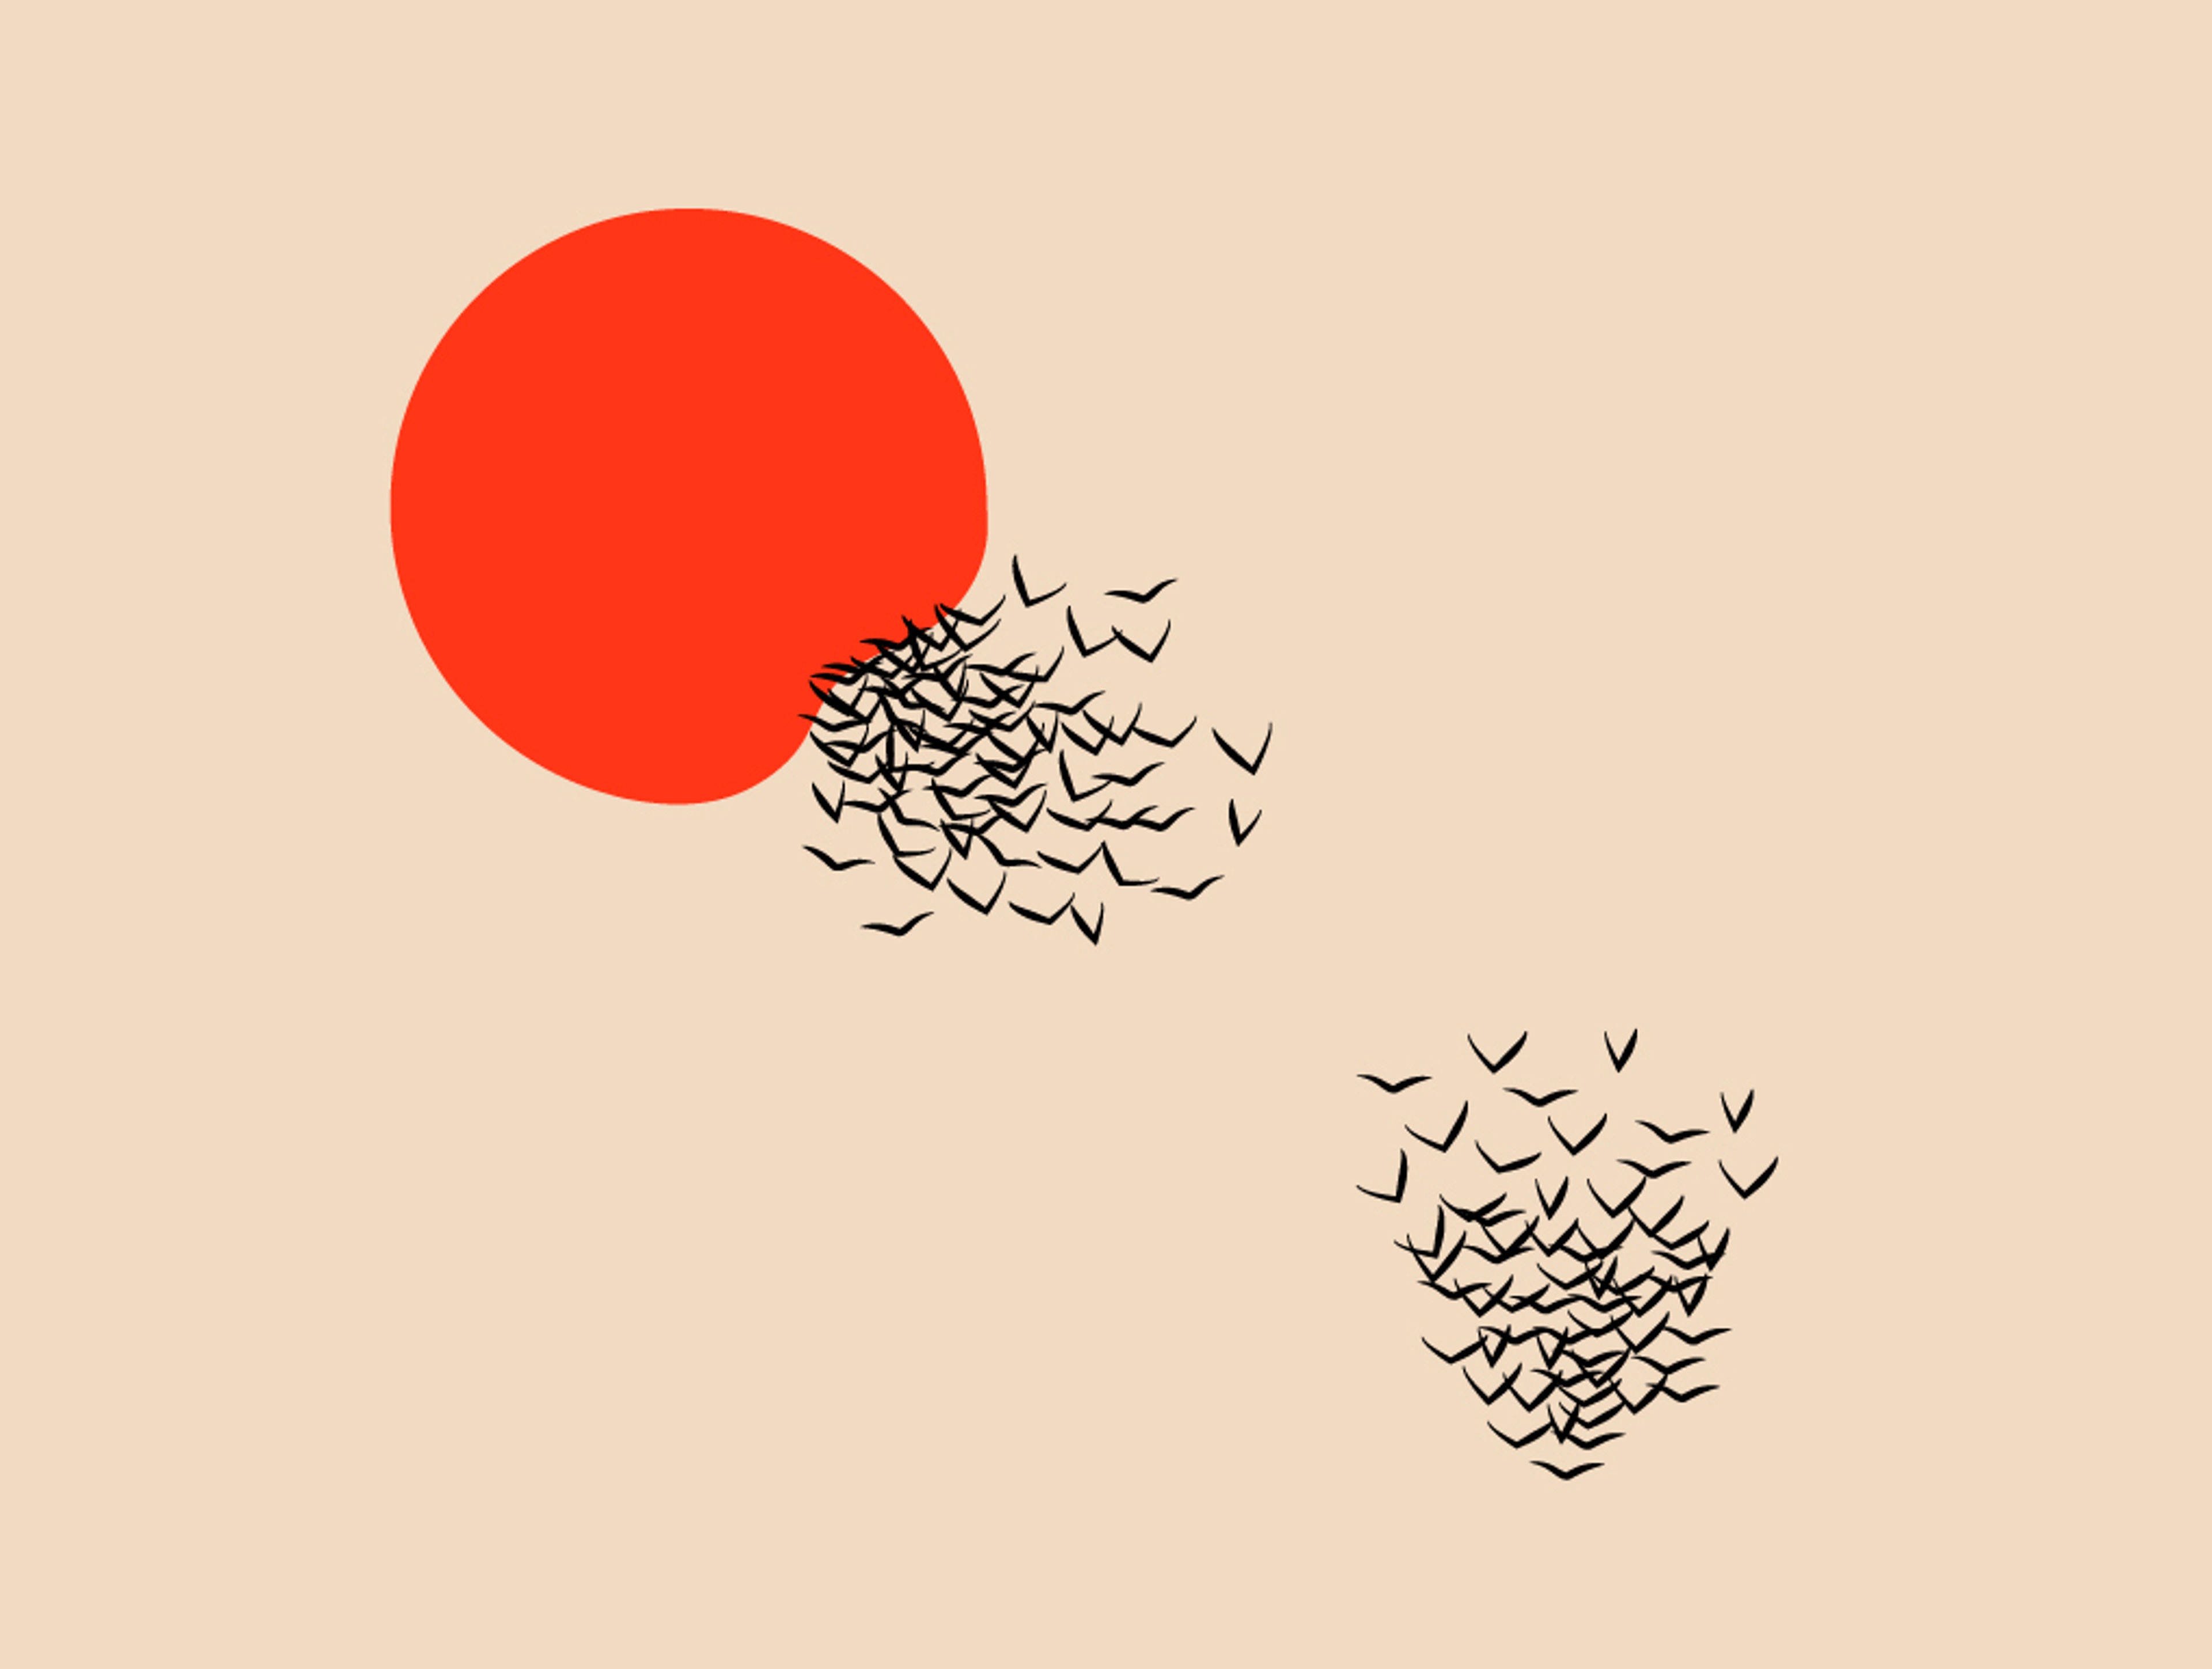 Illustration of the "Creatures" chapter depicting a red sun and flock of birds.